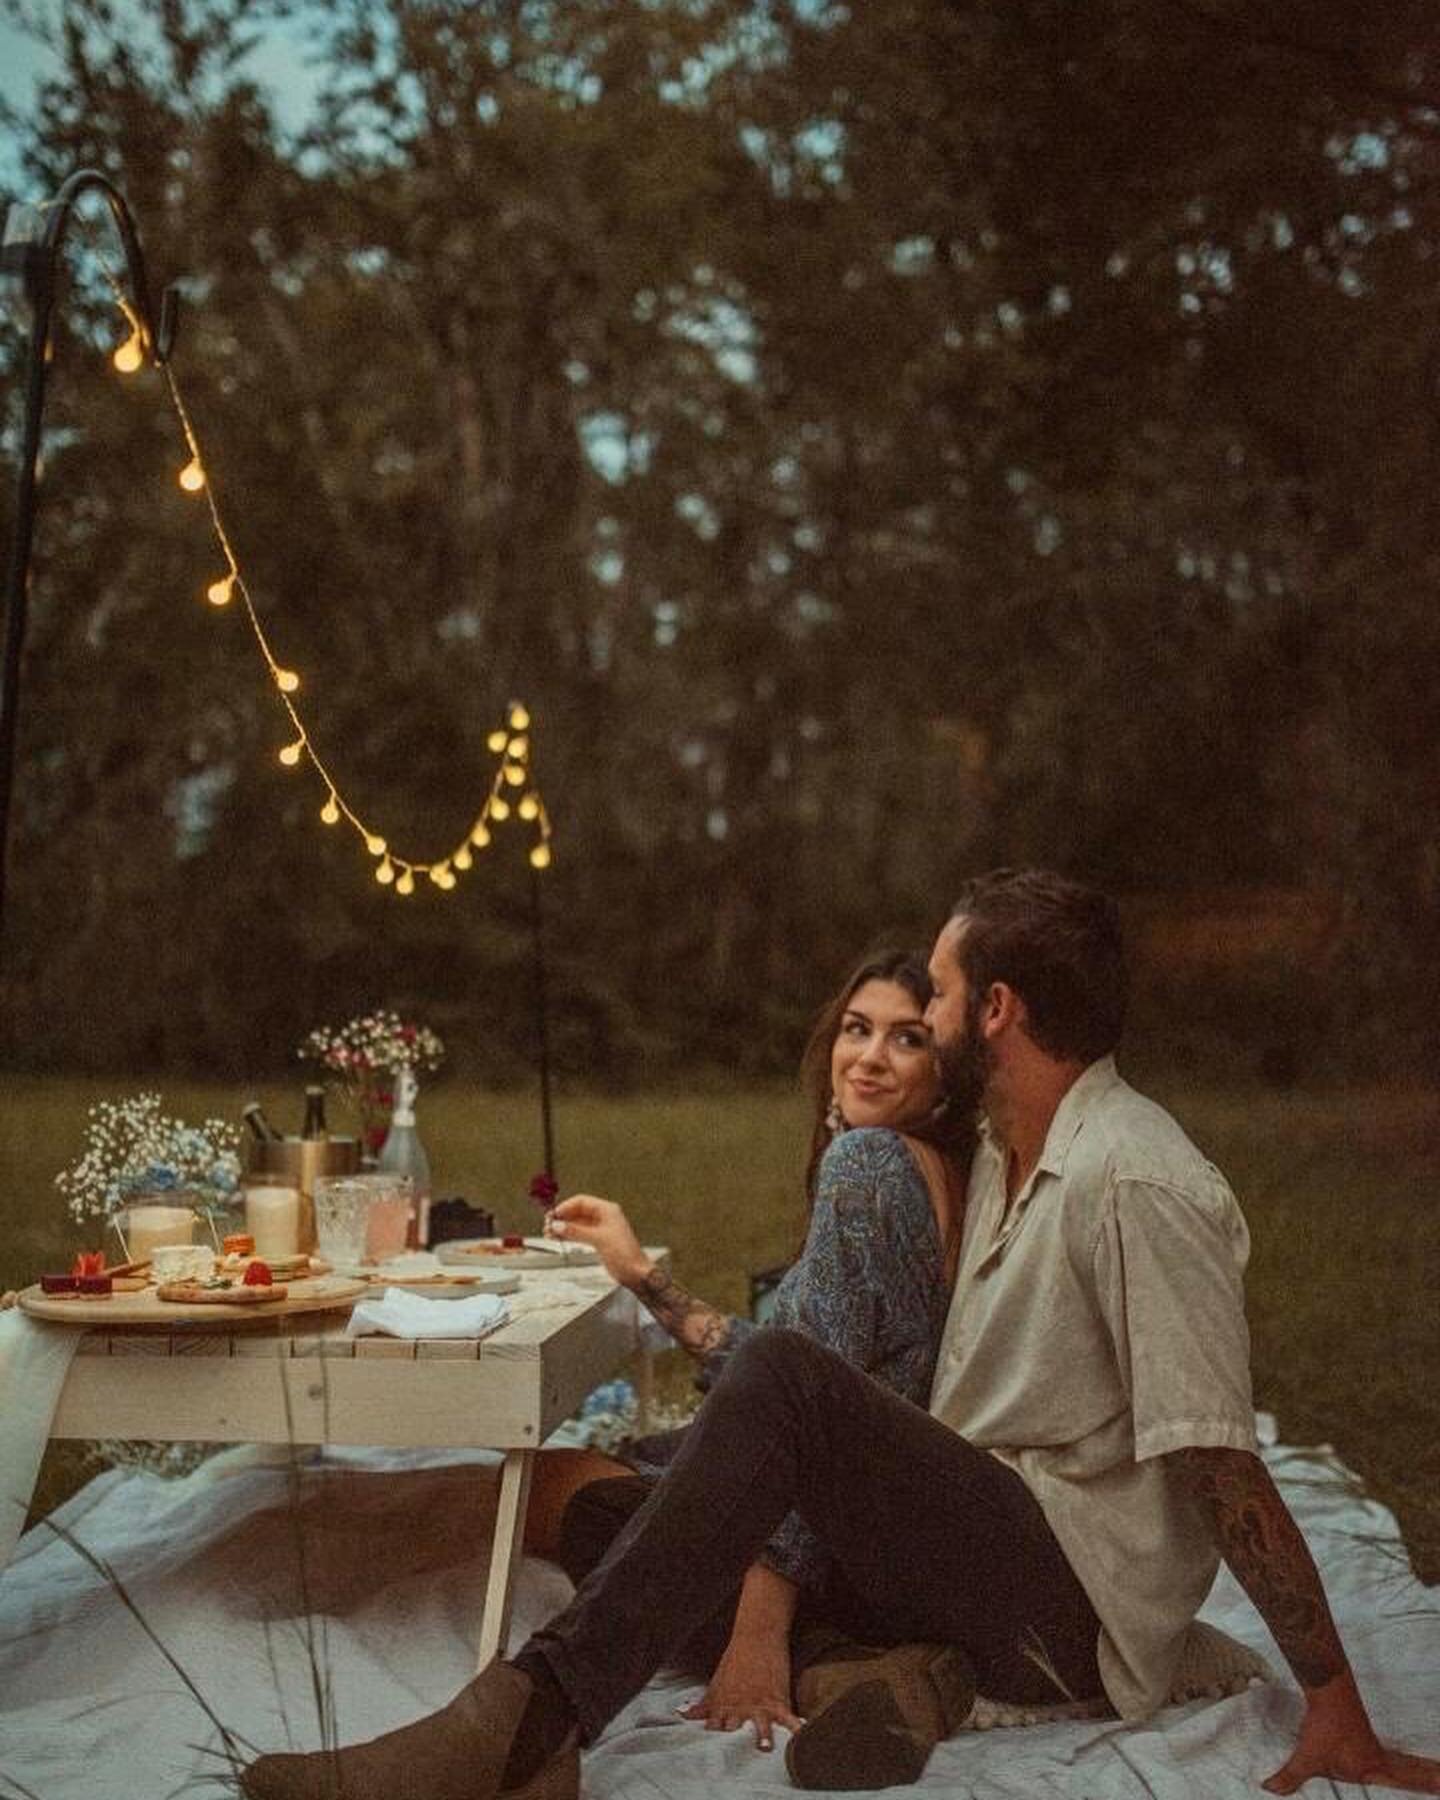 save the date for your picnic photoshoot. we love to set the backdrop to your memories. 

📷: @brandi.denslow.photo